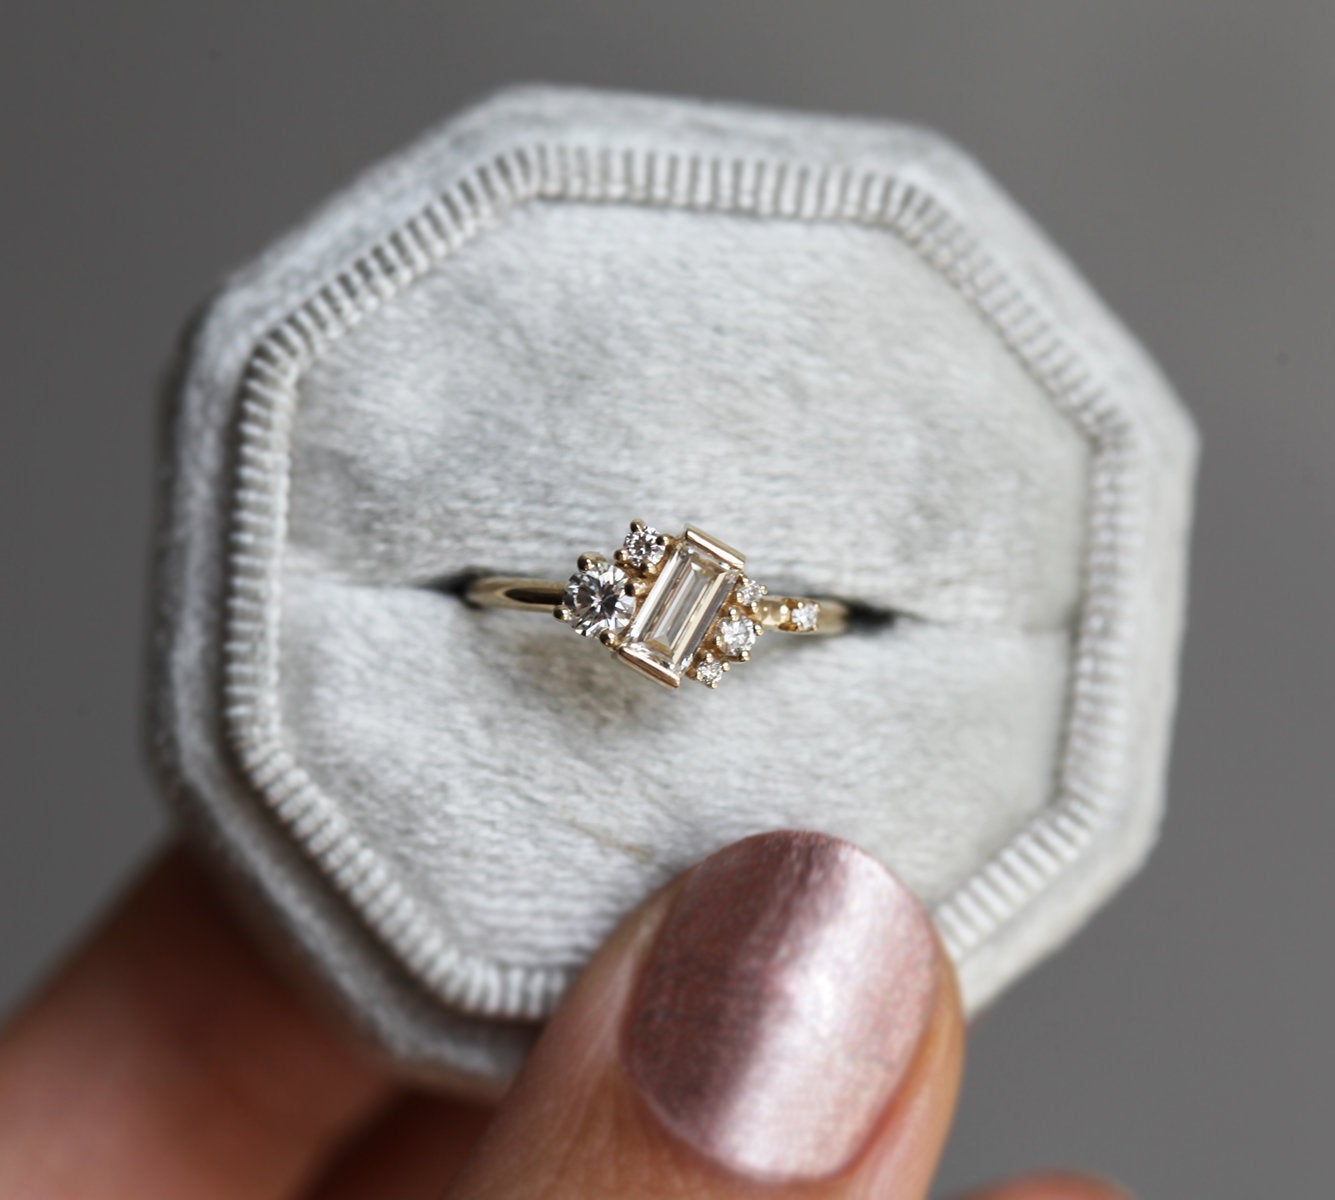 Baguette-shaped white diamond cluster ring with round white side diamonds